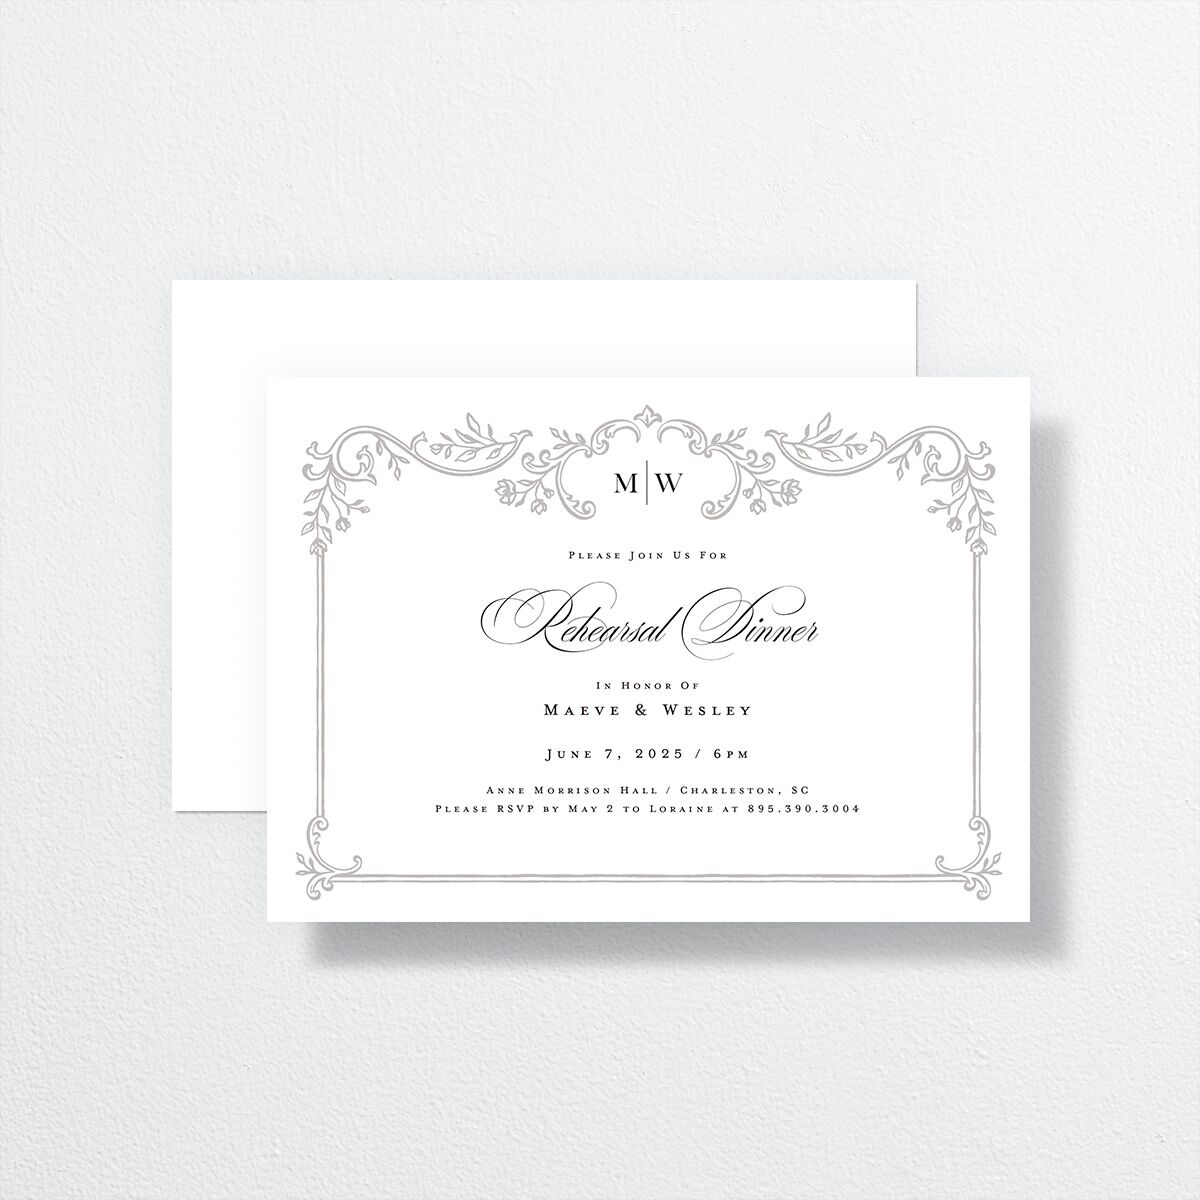 Opulences Rehearsal Dinner Invitations by Vera Wang front-and-back